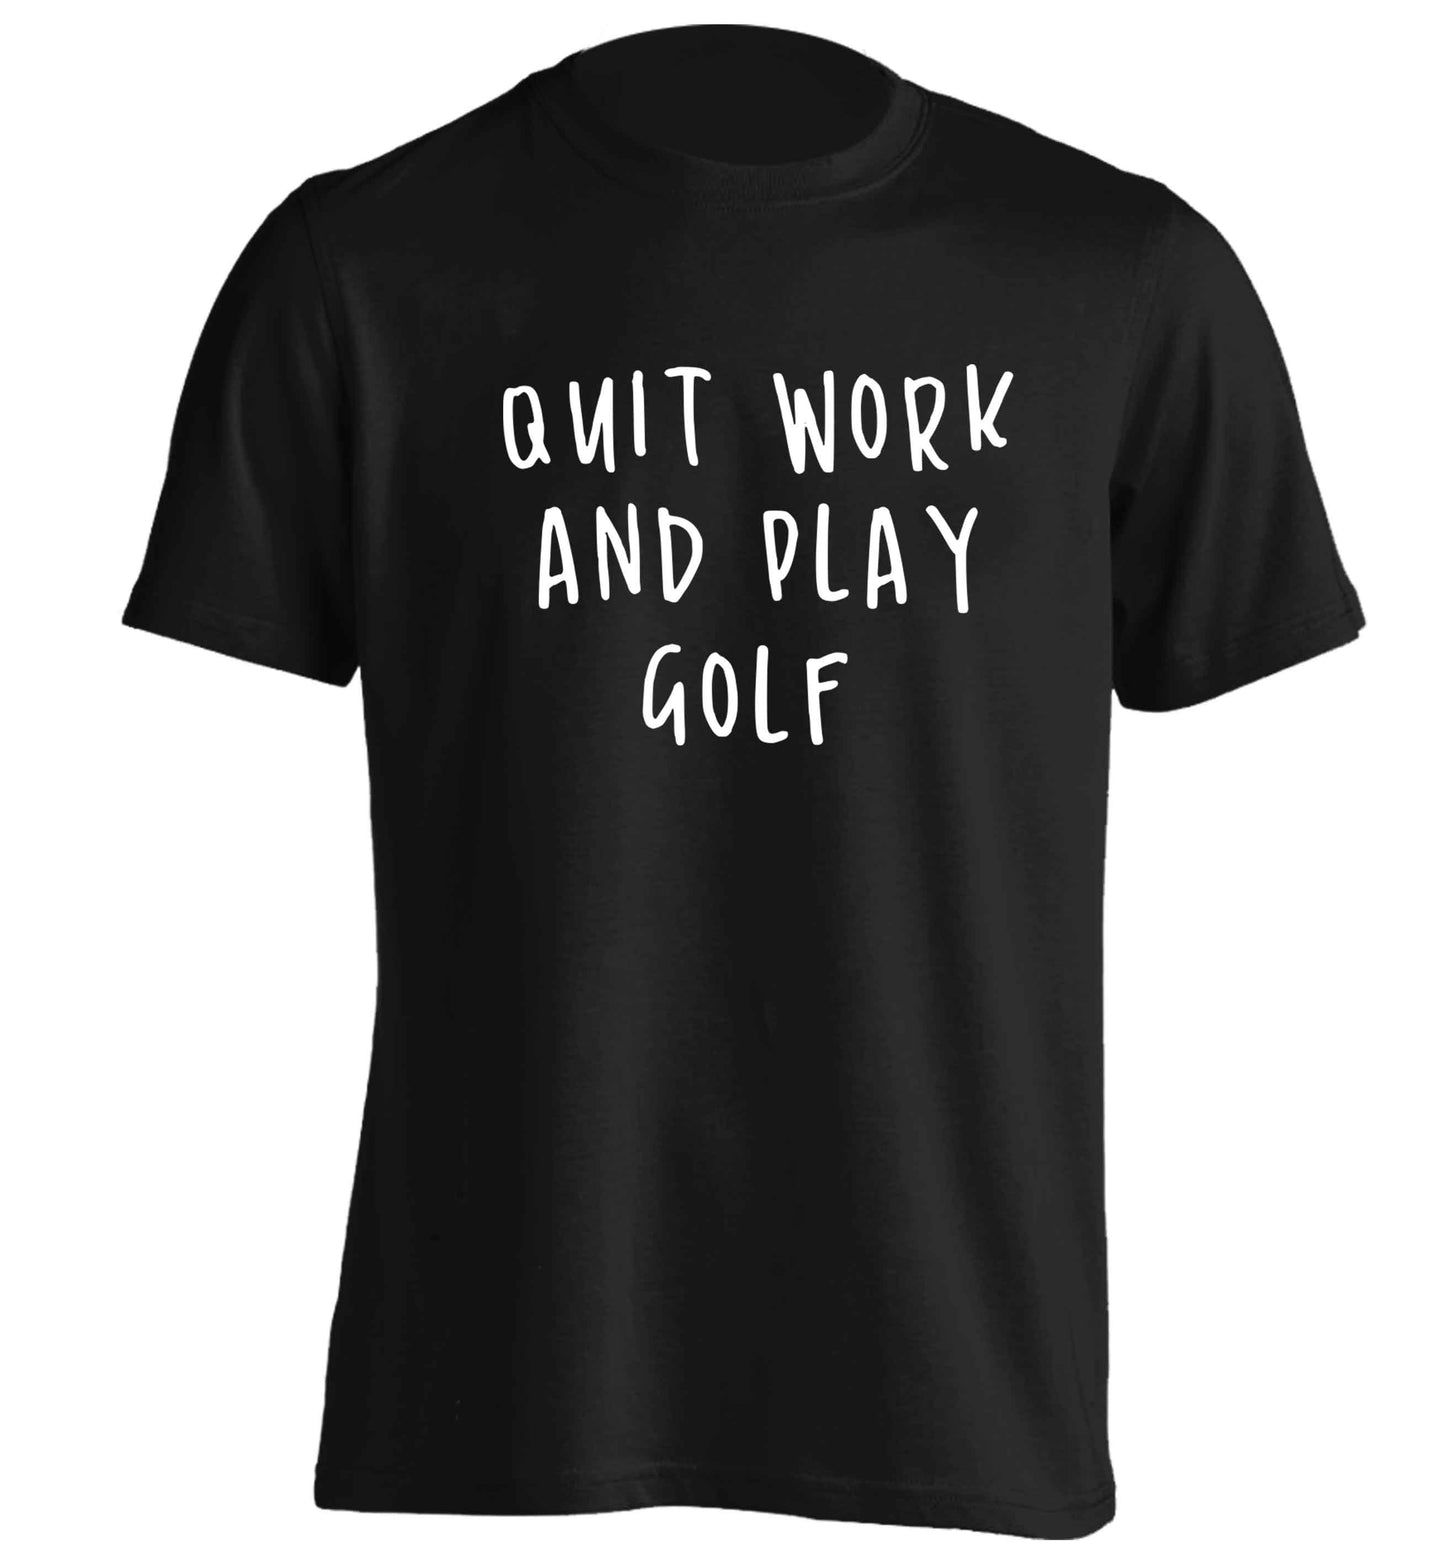 Quit work and play golf adults unisex black Tshirt 2XL